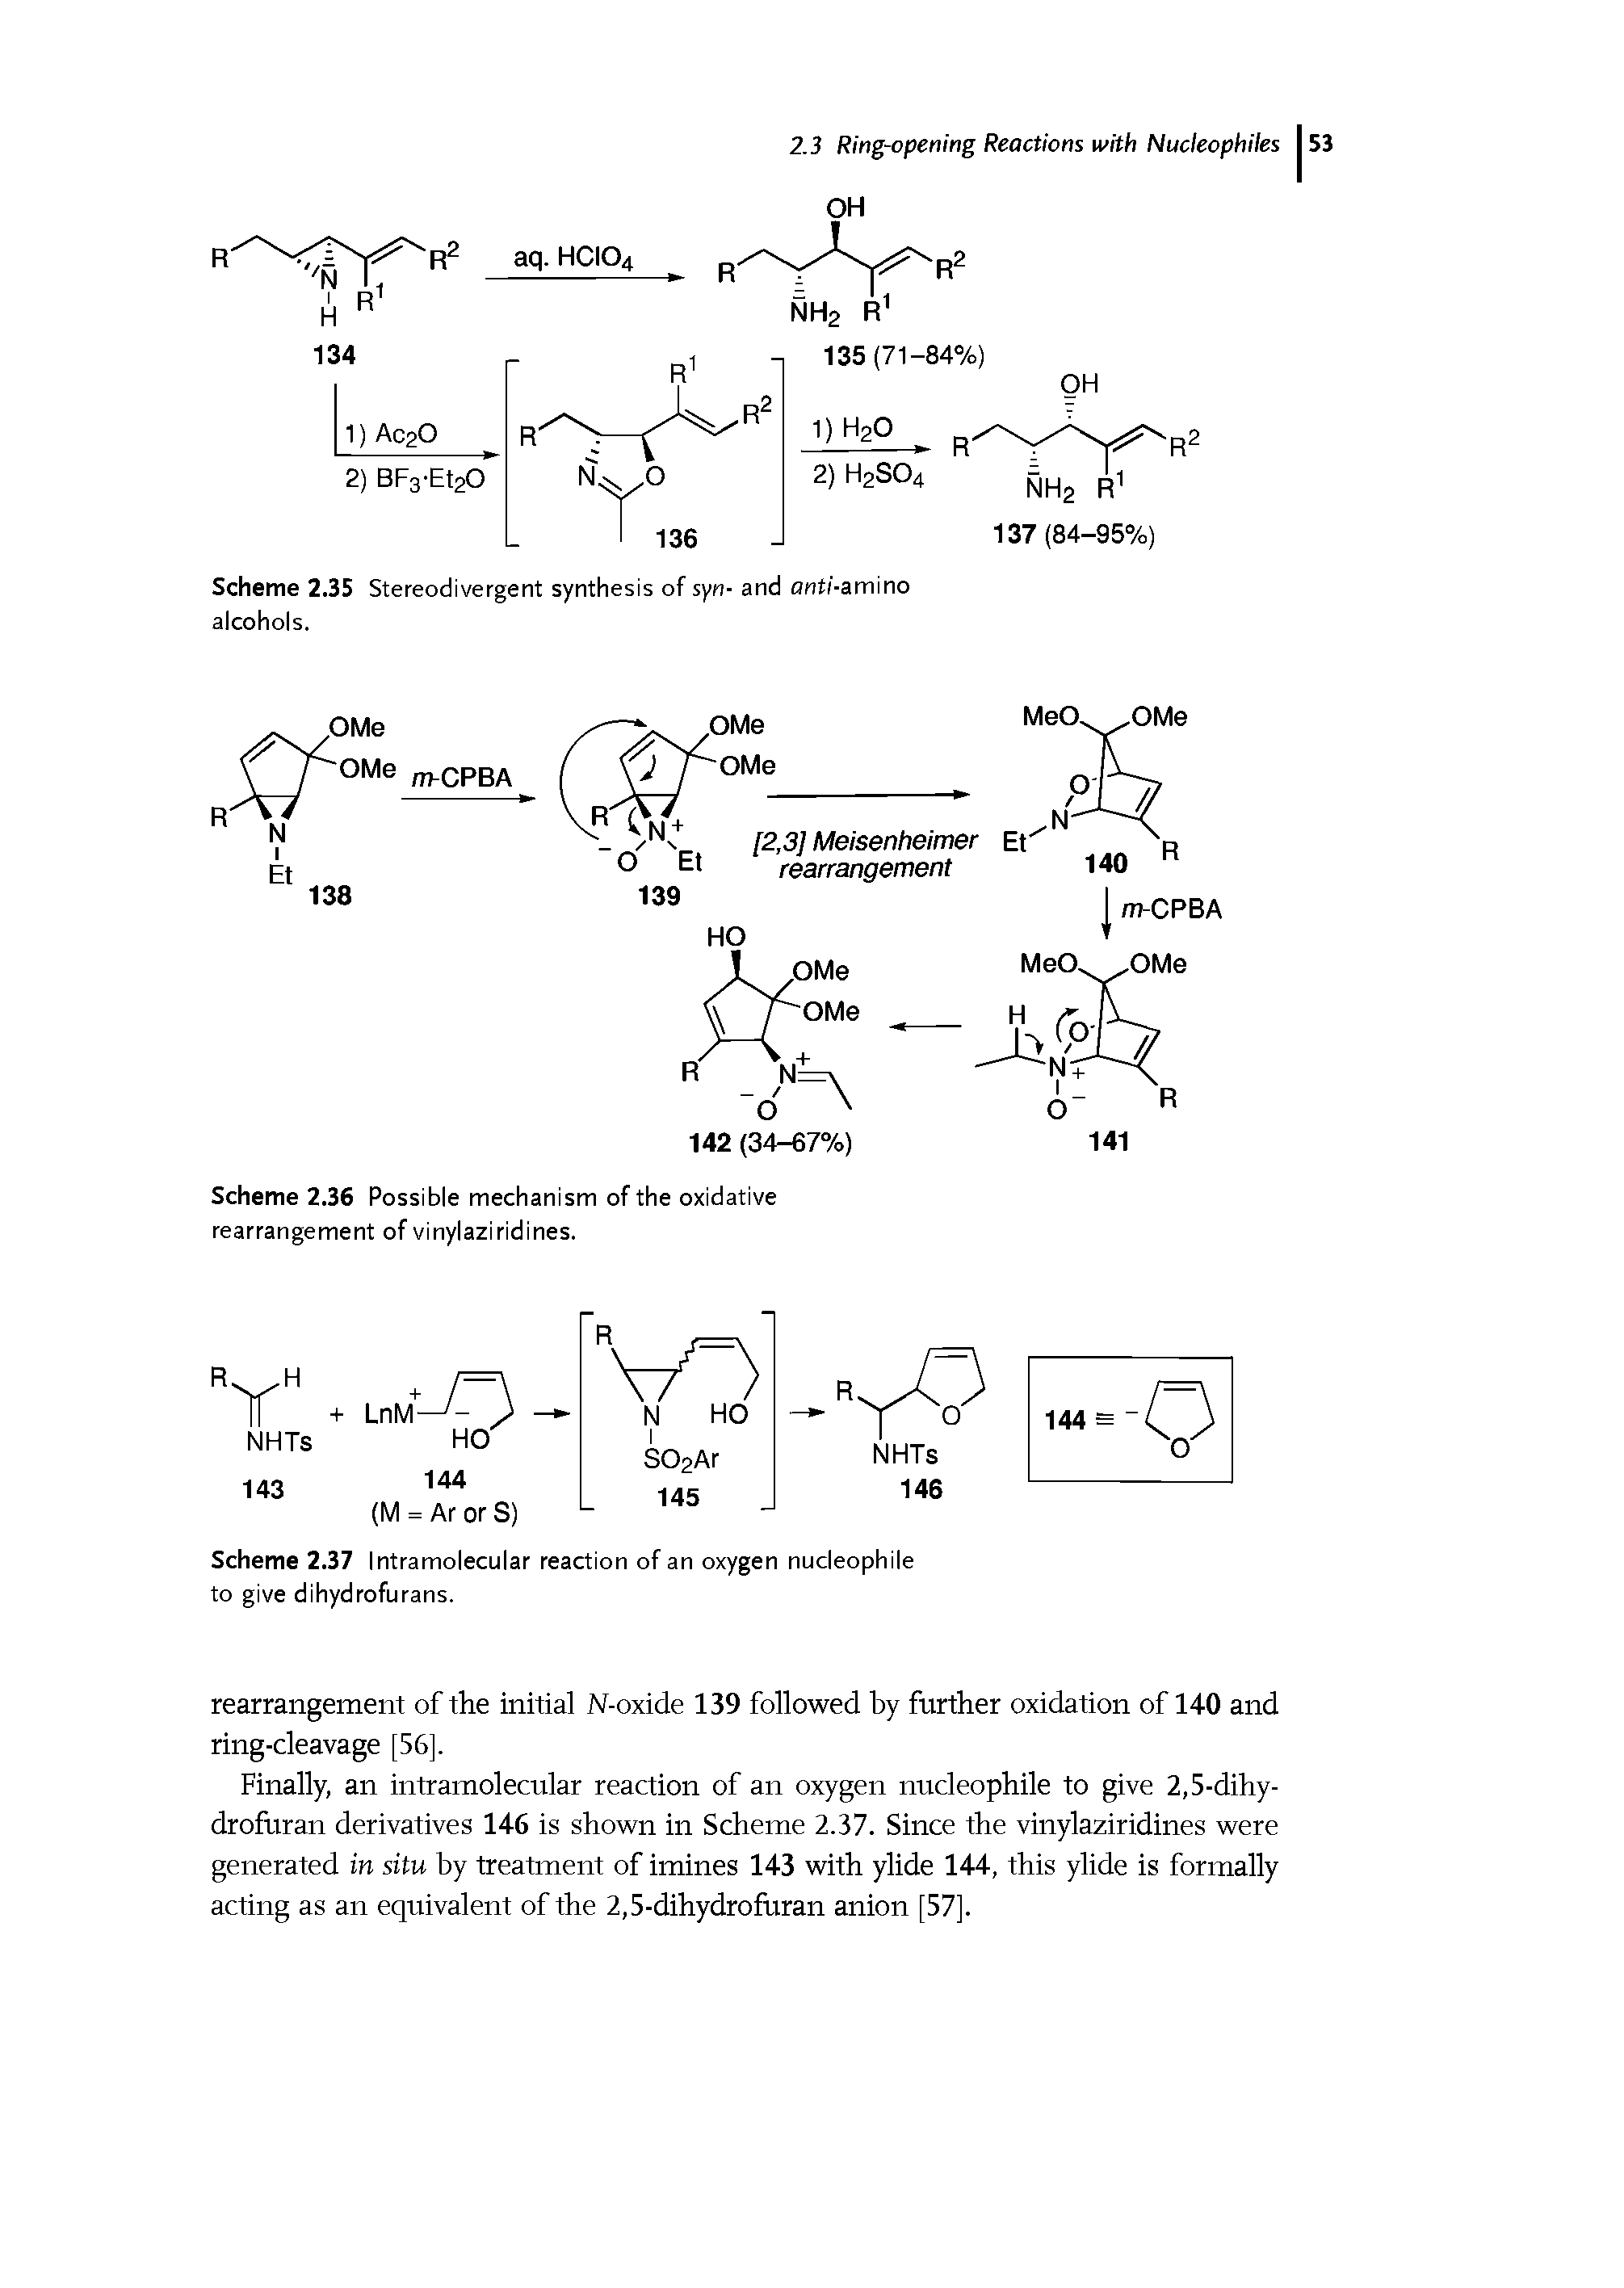 Scheme 2.37 Intramolecular reaction of an oxygen nucleophile to give dihydrofurans.